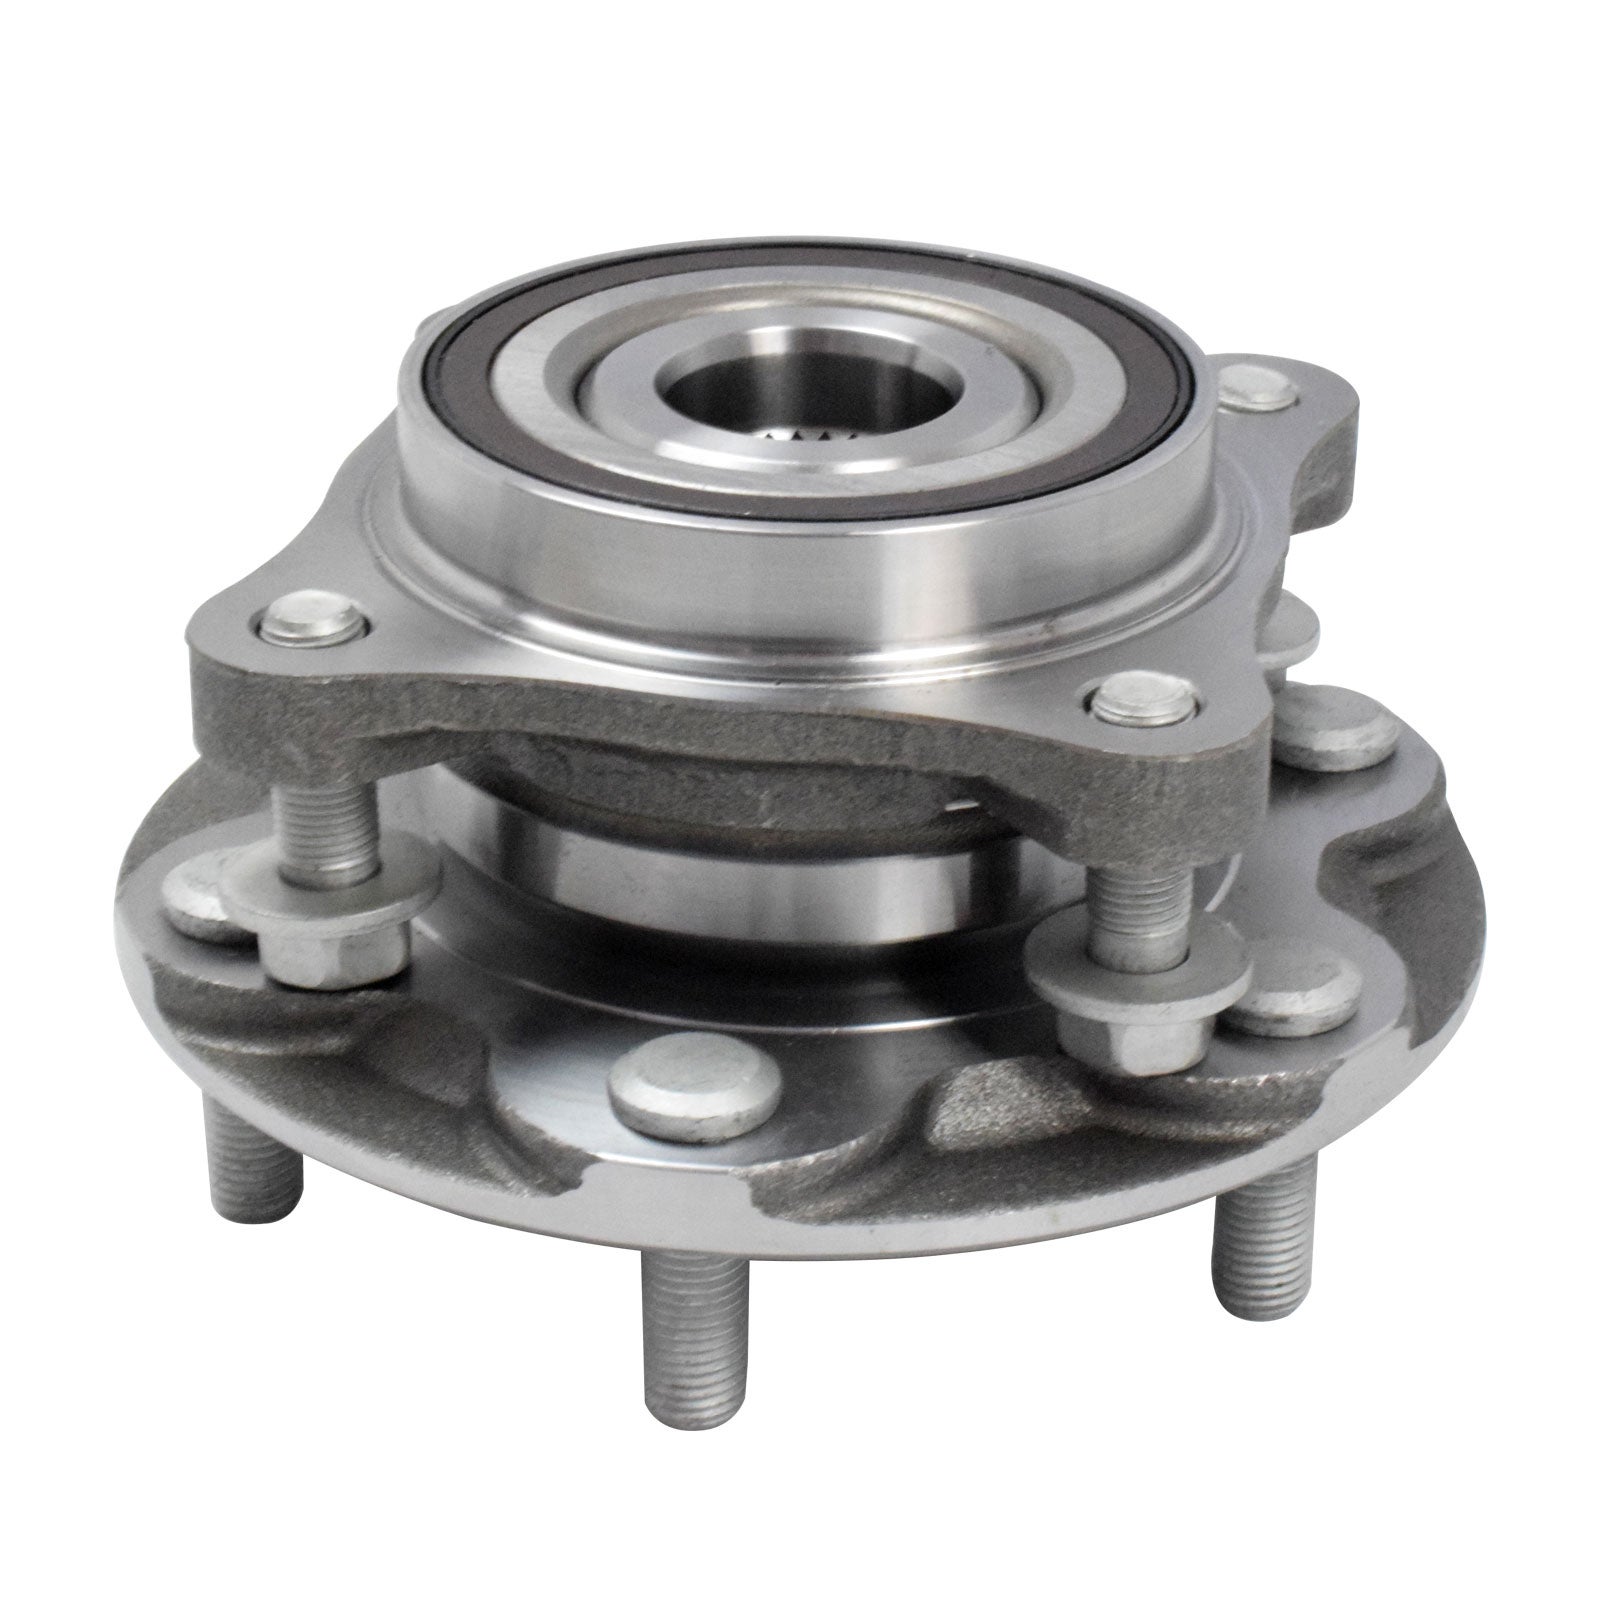 Front Wheel Bearing Hub Assembly ABS Fit For Toyota Prado 120 150 Series 2003-On 4WD